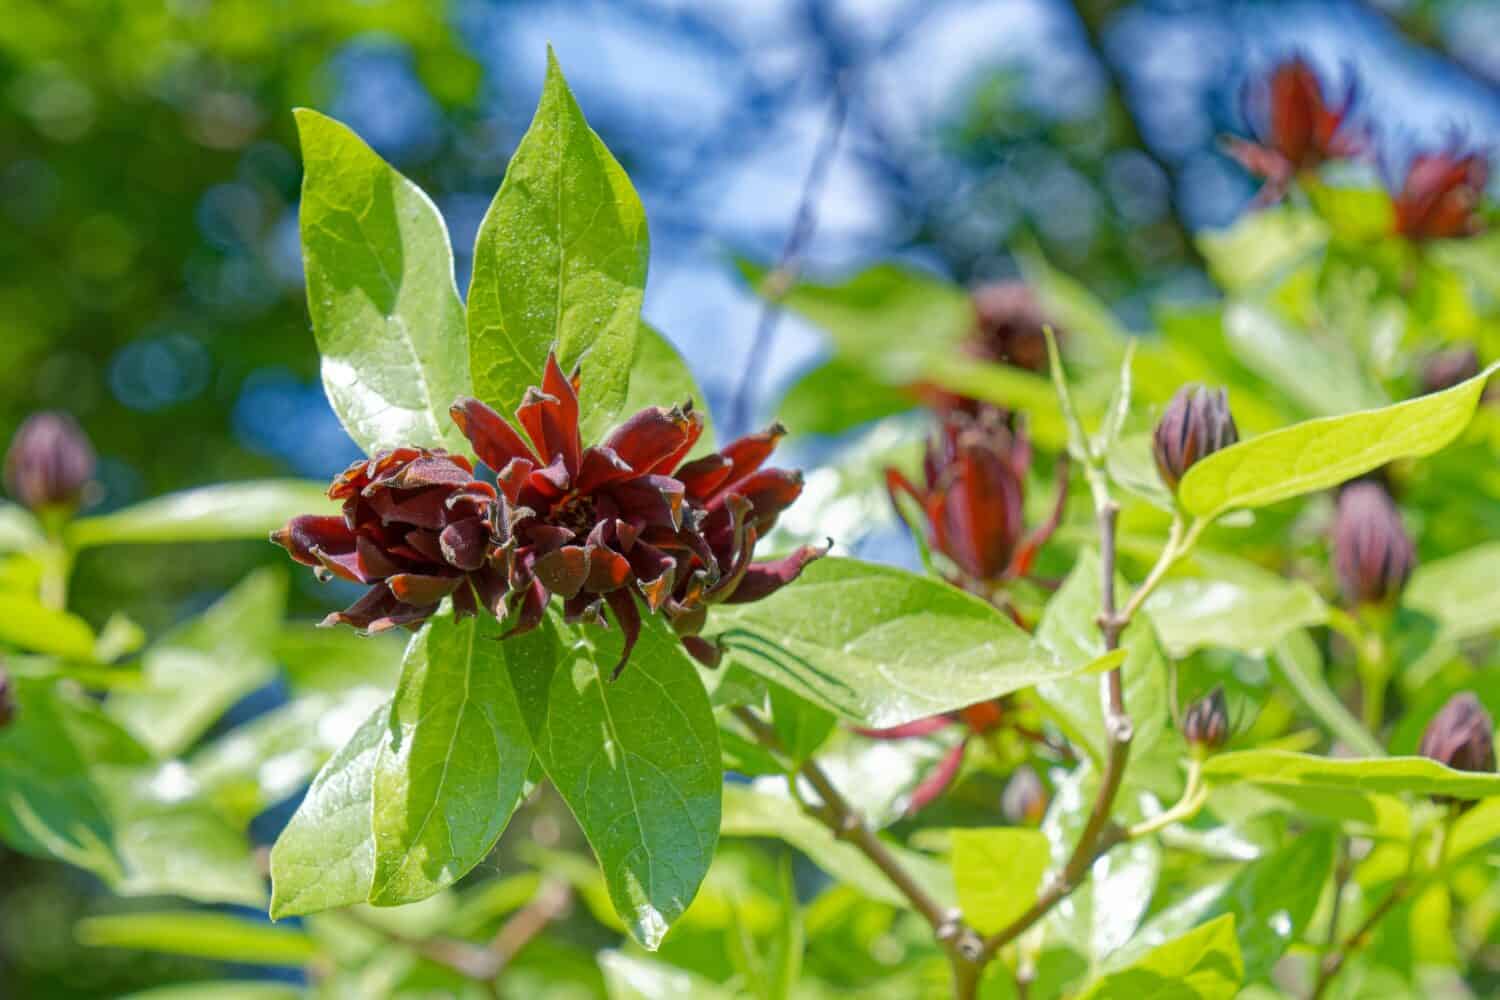 Calycanthus occidentalis is a shrub with red flowers